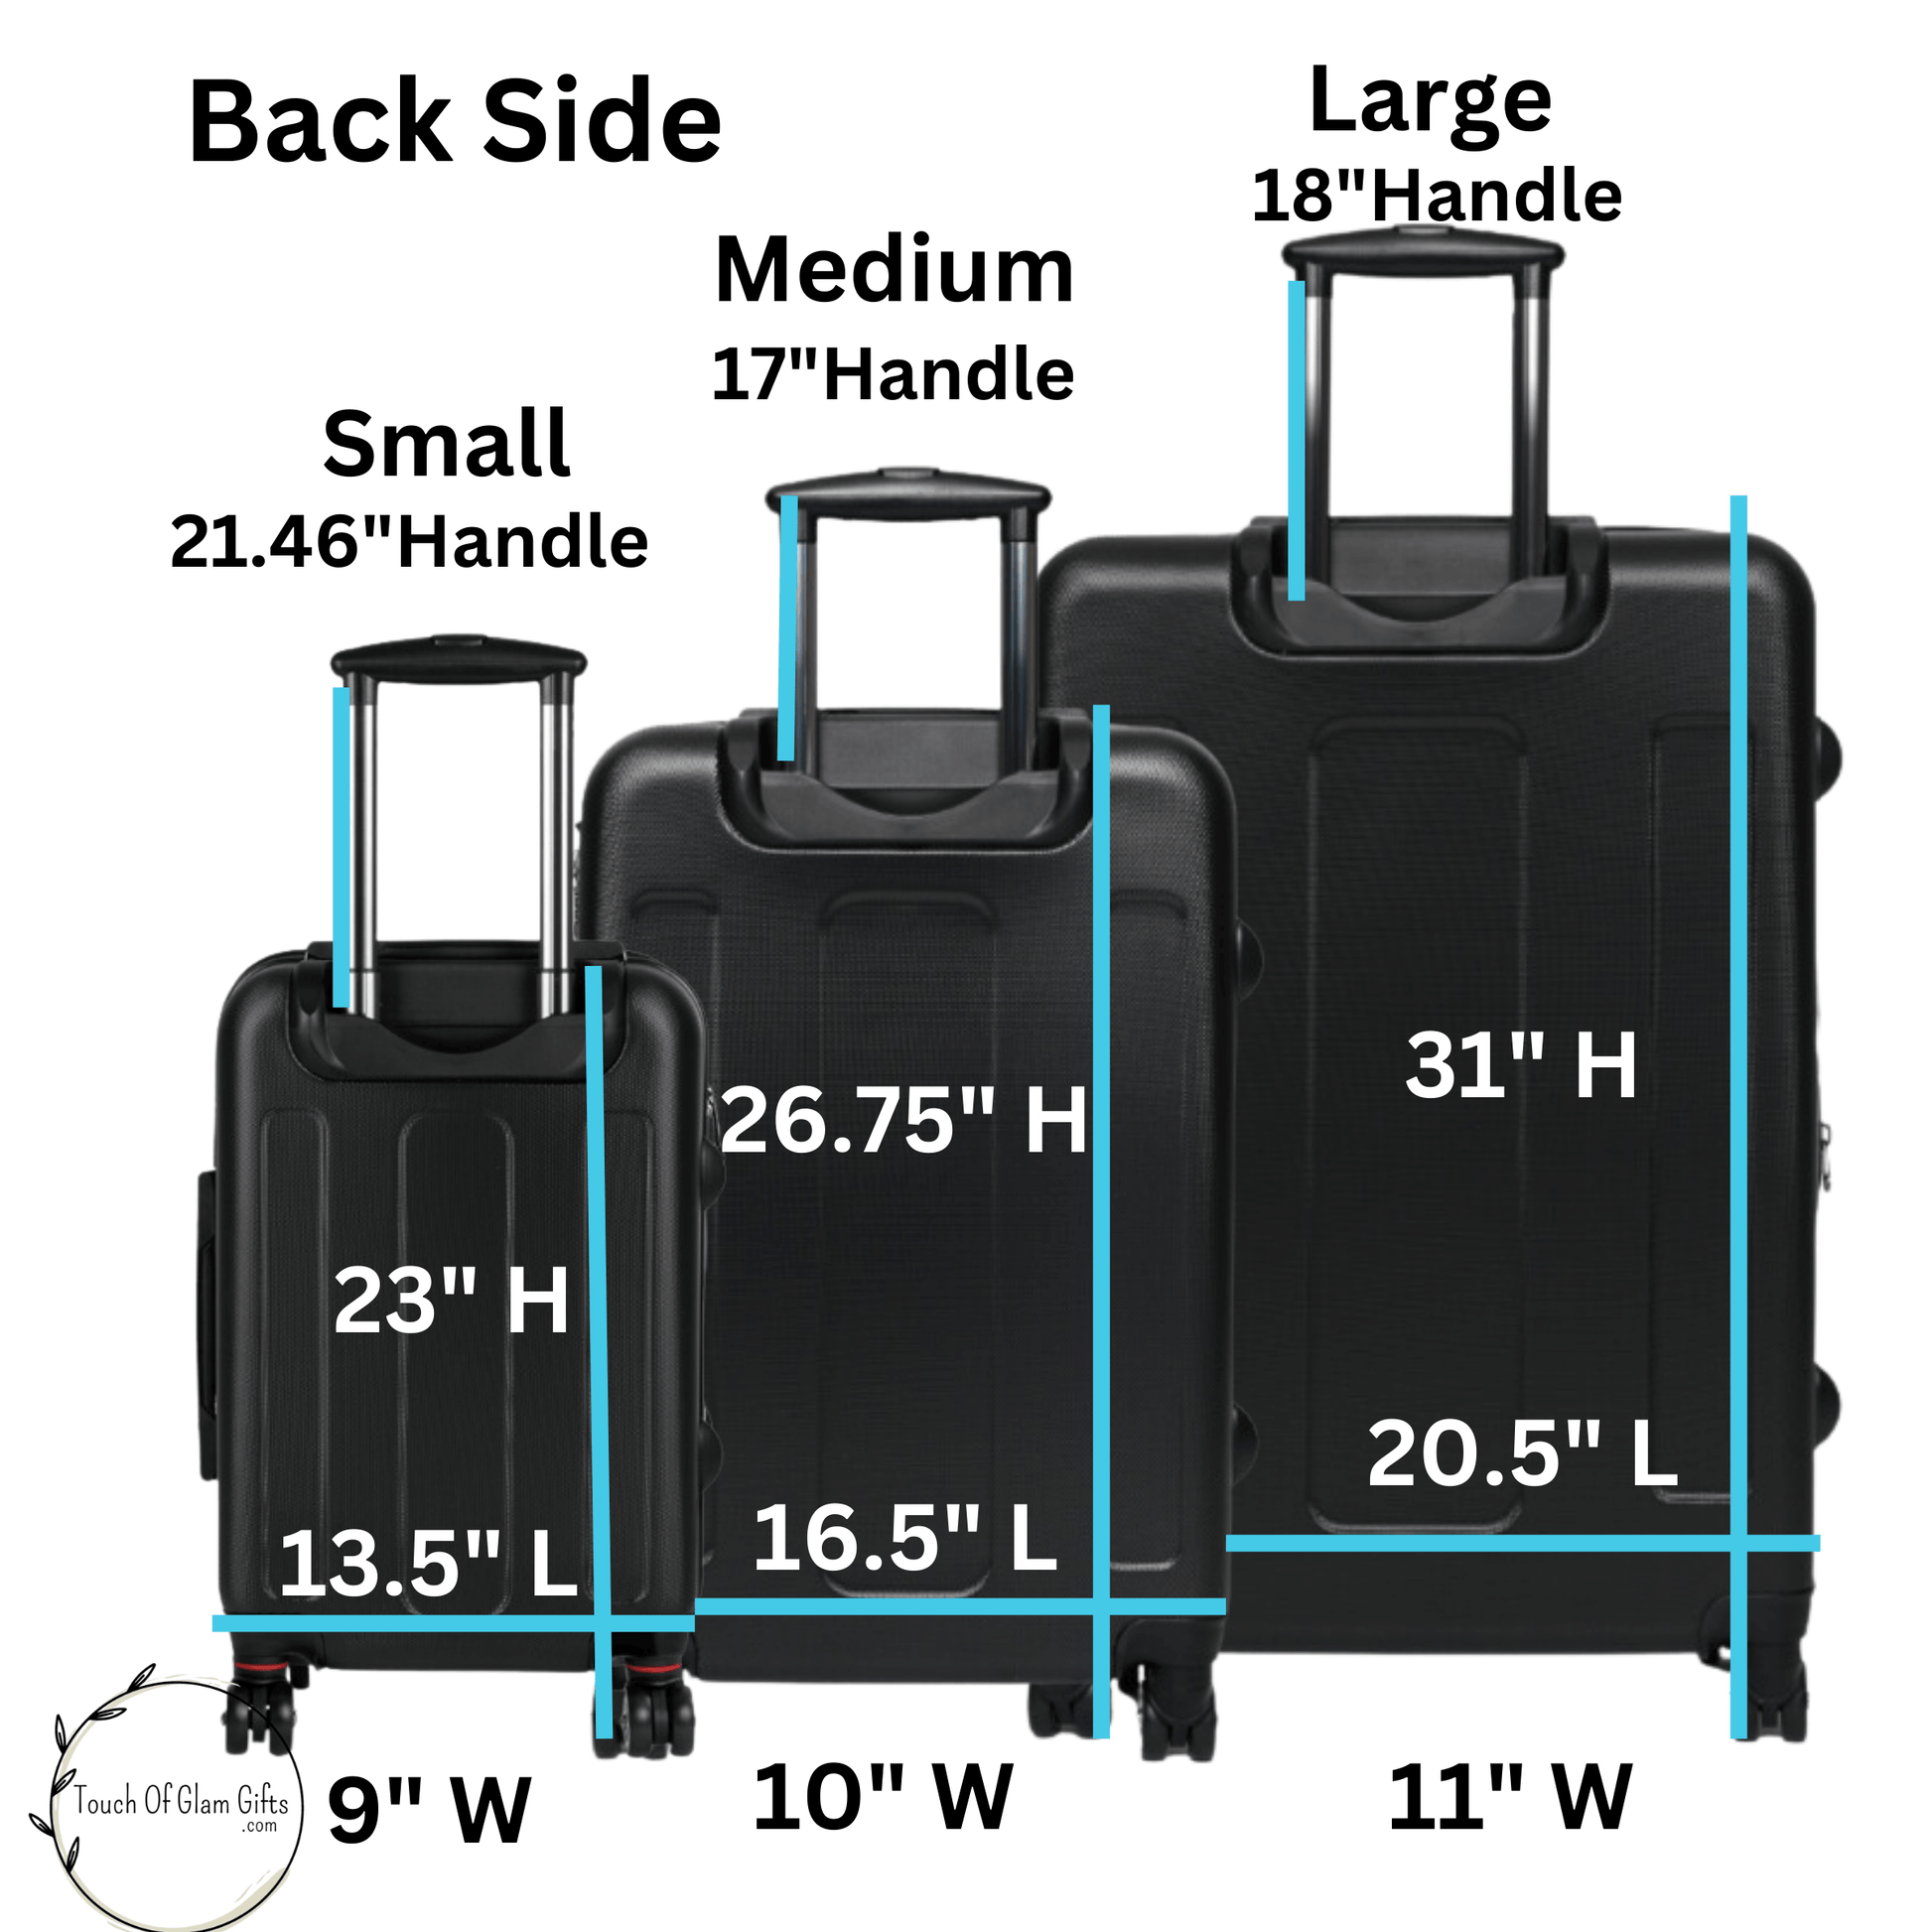 The back side of the hard shell luggage is plain black. This picture shows the 3 sizes back side and the measurements of eac. 